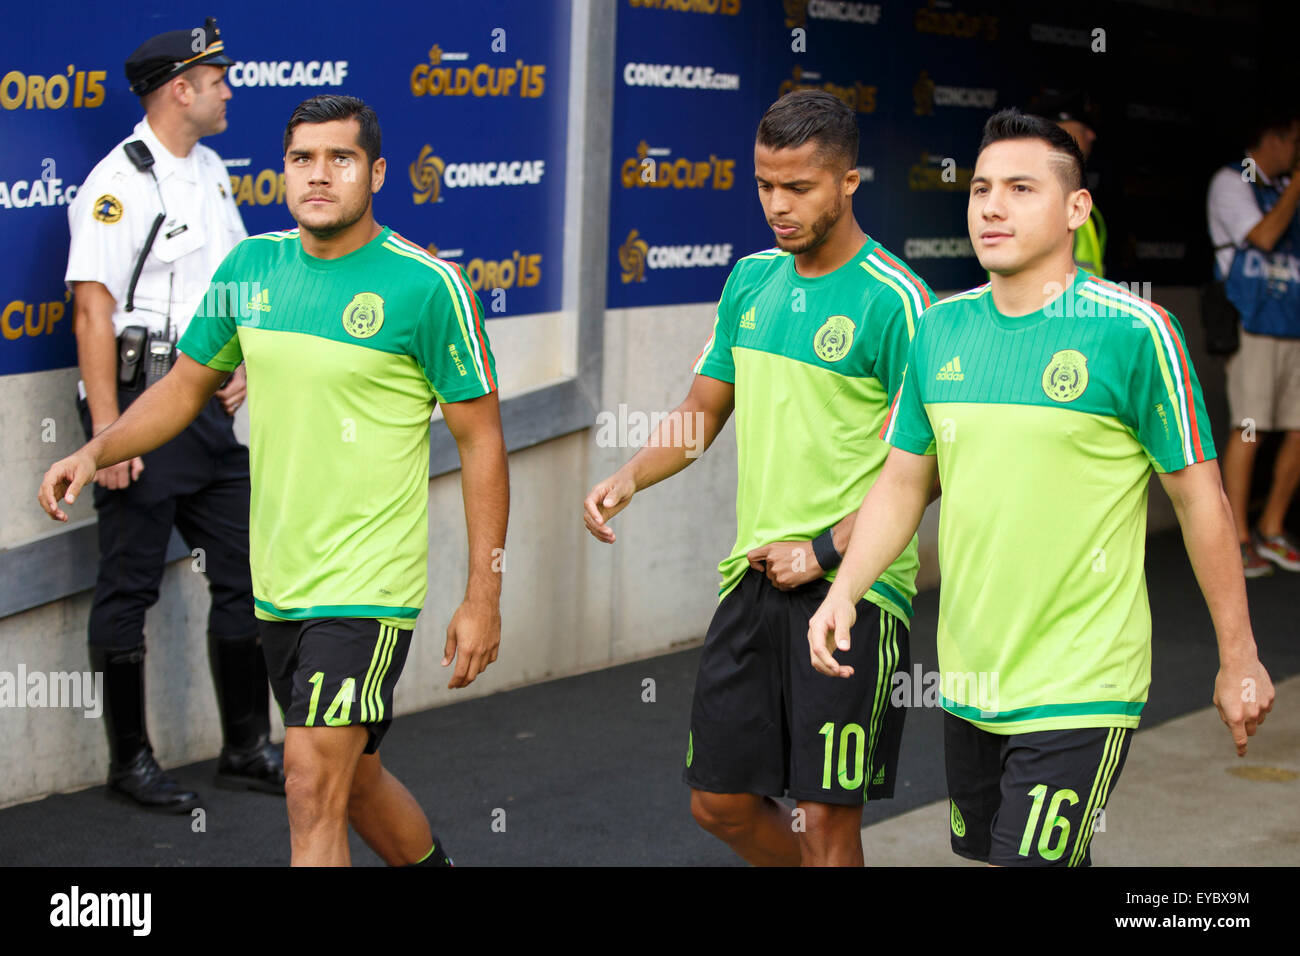 Philadelphia, Pennsylvania, USA. 26th July, 2015. Mexico forward Javier Hernandez (14), forward Giovani Dos Santos (10) and midfielder Antonio Rios (16) come out for warm-ups during the CONCACAF Gold Cup 2015 Final match between Jamaica and Mexico at Lincoln Financial Field in Philadelphia, Pennsylvania. Christopher Szagola/CSM/Alamy Live News Stock Photo